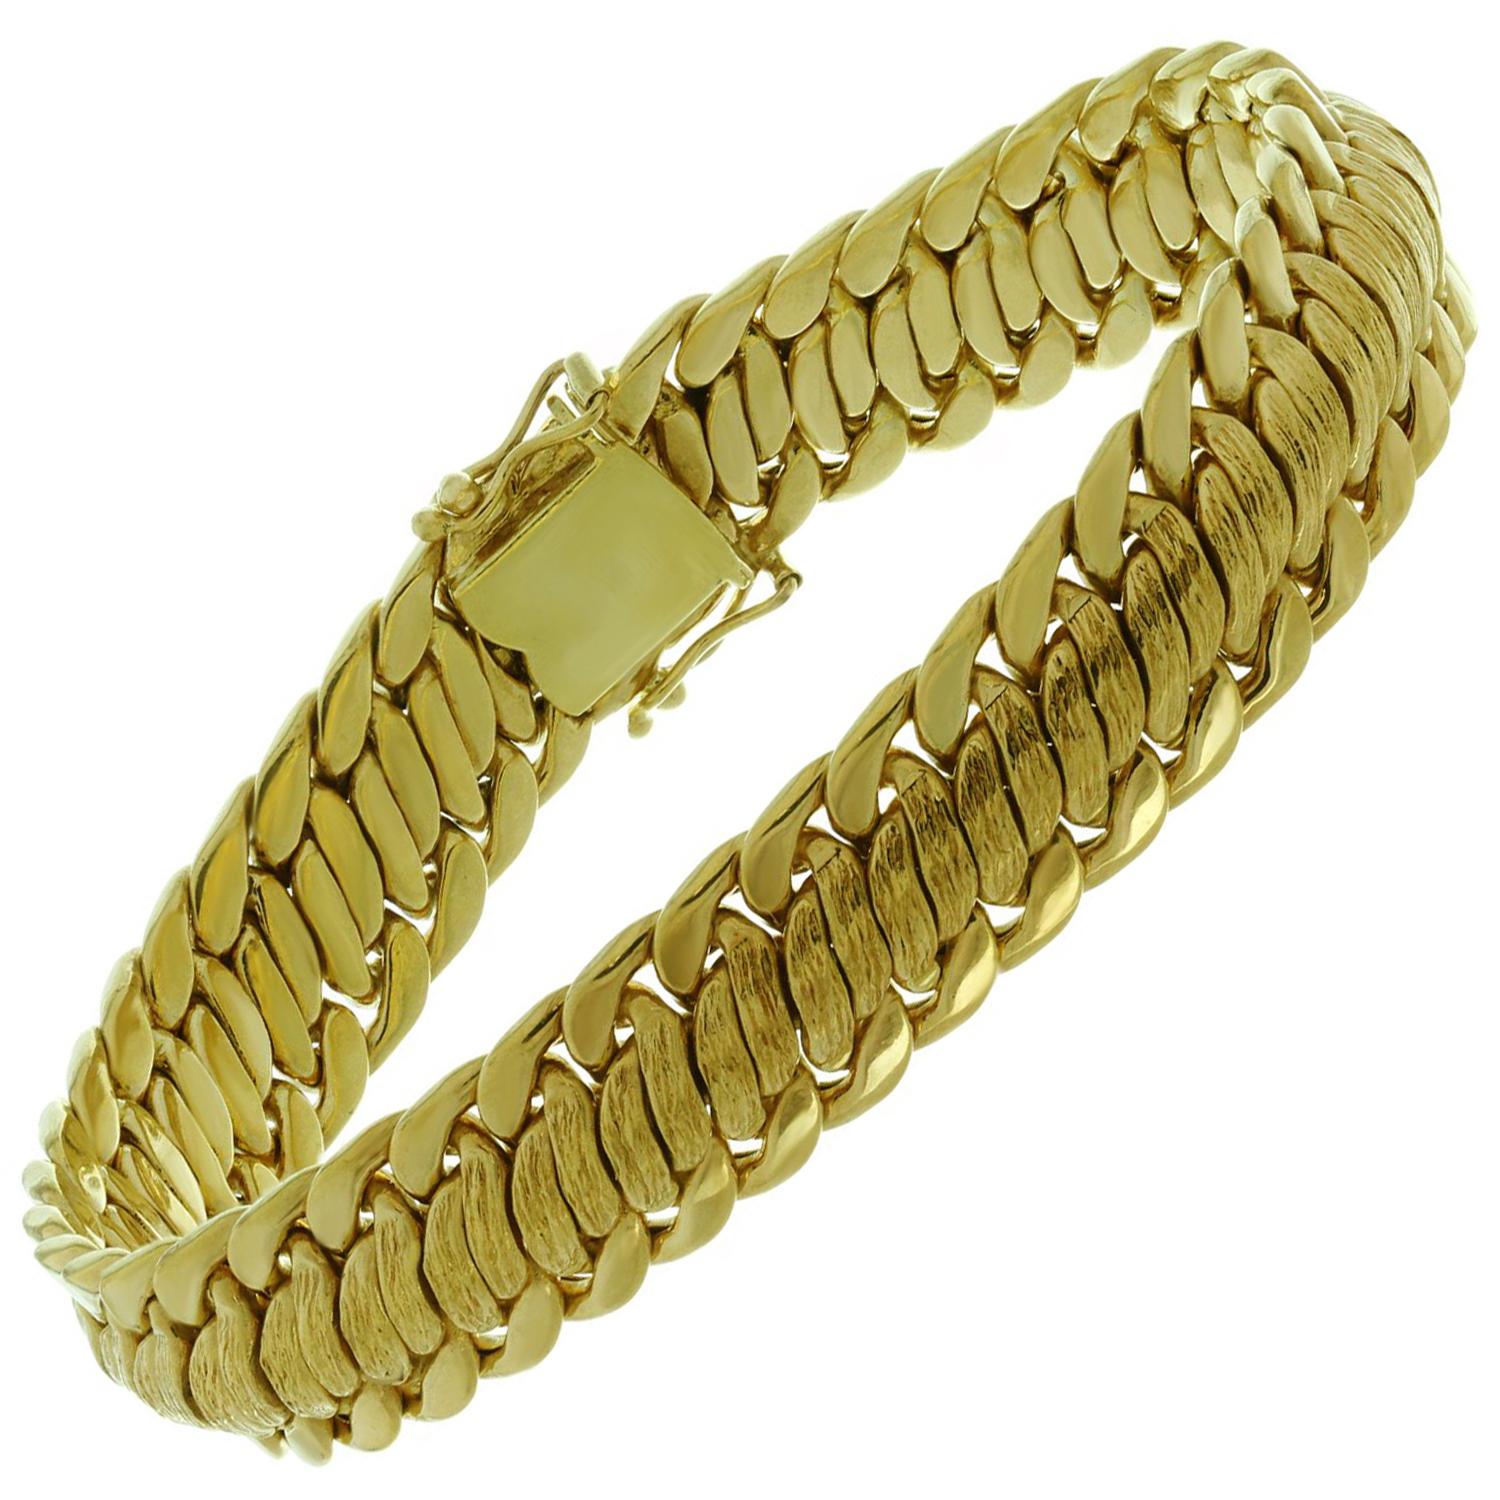 Vintage 18k Solid Yellow Gold Braided Bracelet. 